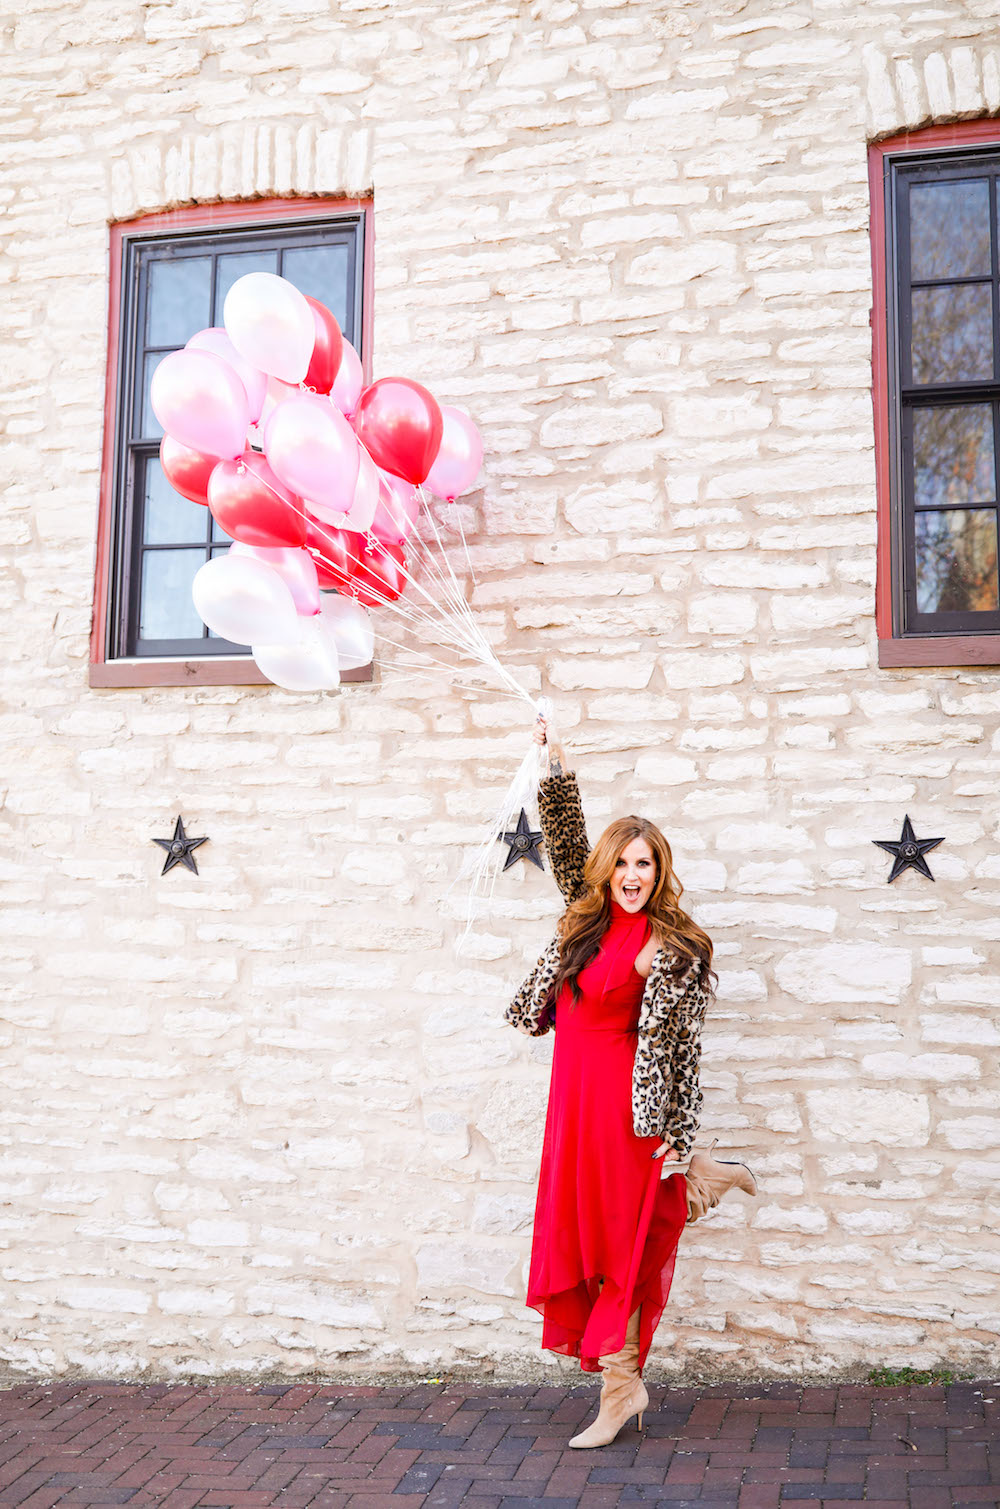 The Gifts of Sobriety: 500 Days and Counting - Danielle Main Street Balloons